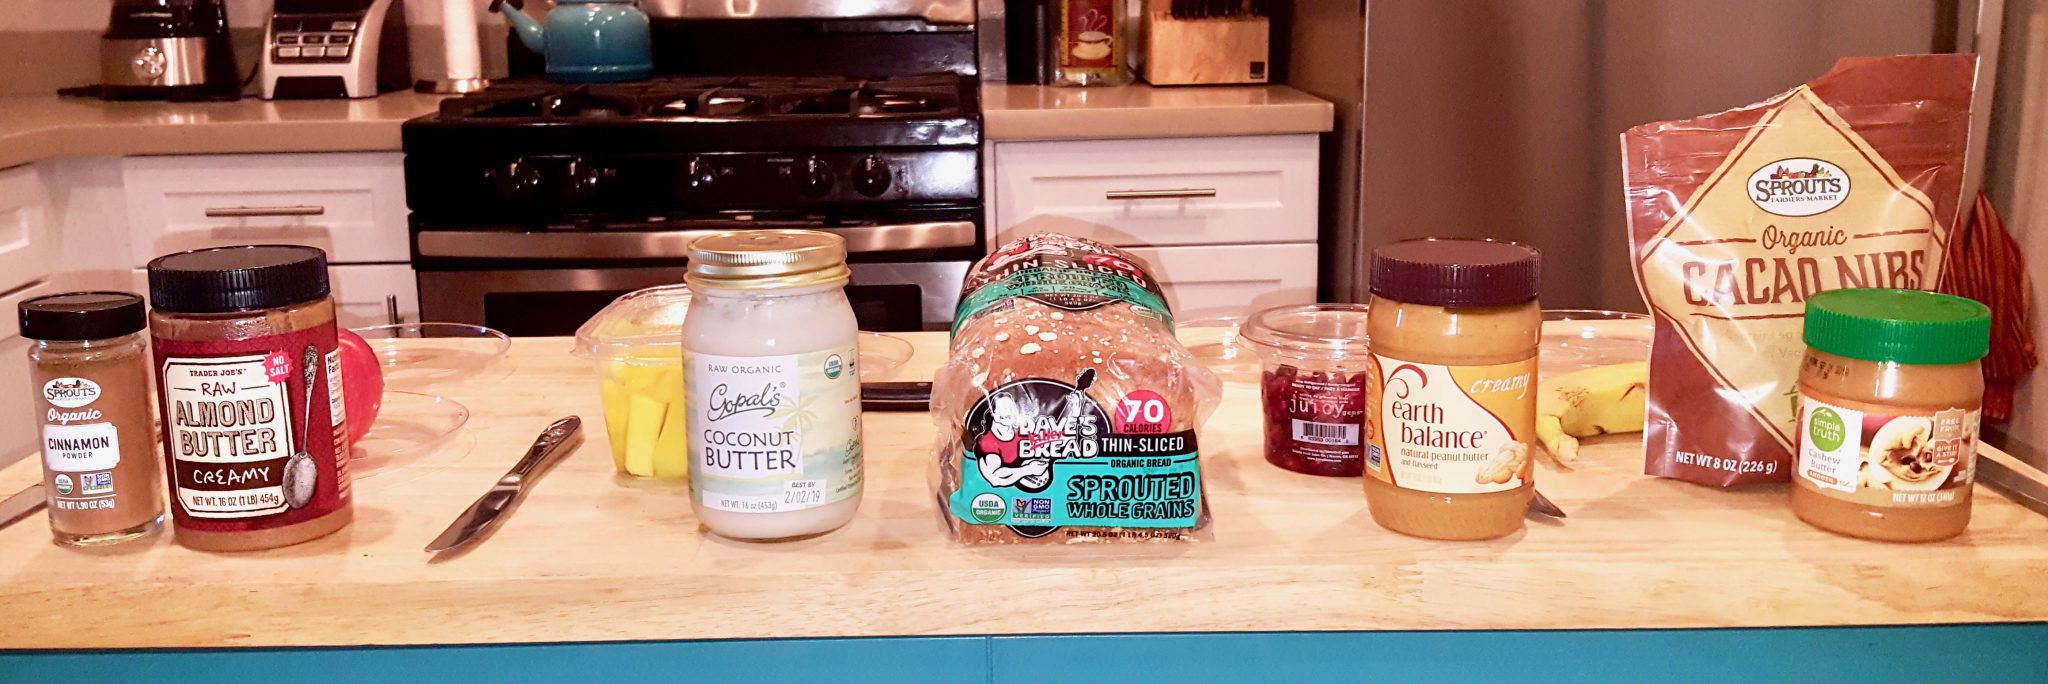 Ingrdients for 4-Gourmet Nut Butter Sandwiches 2